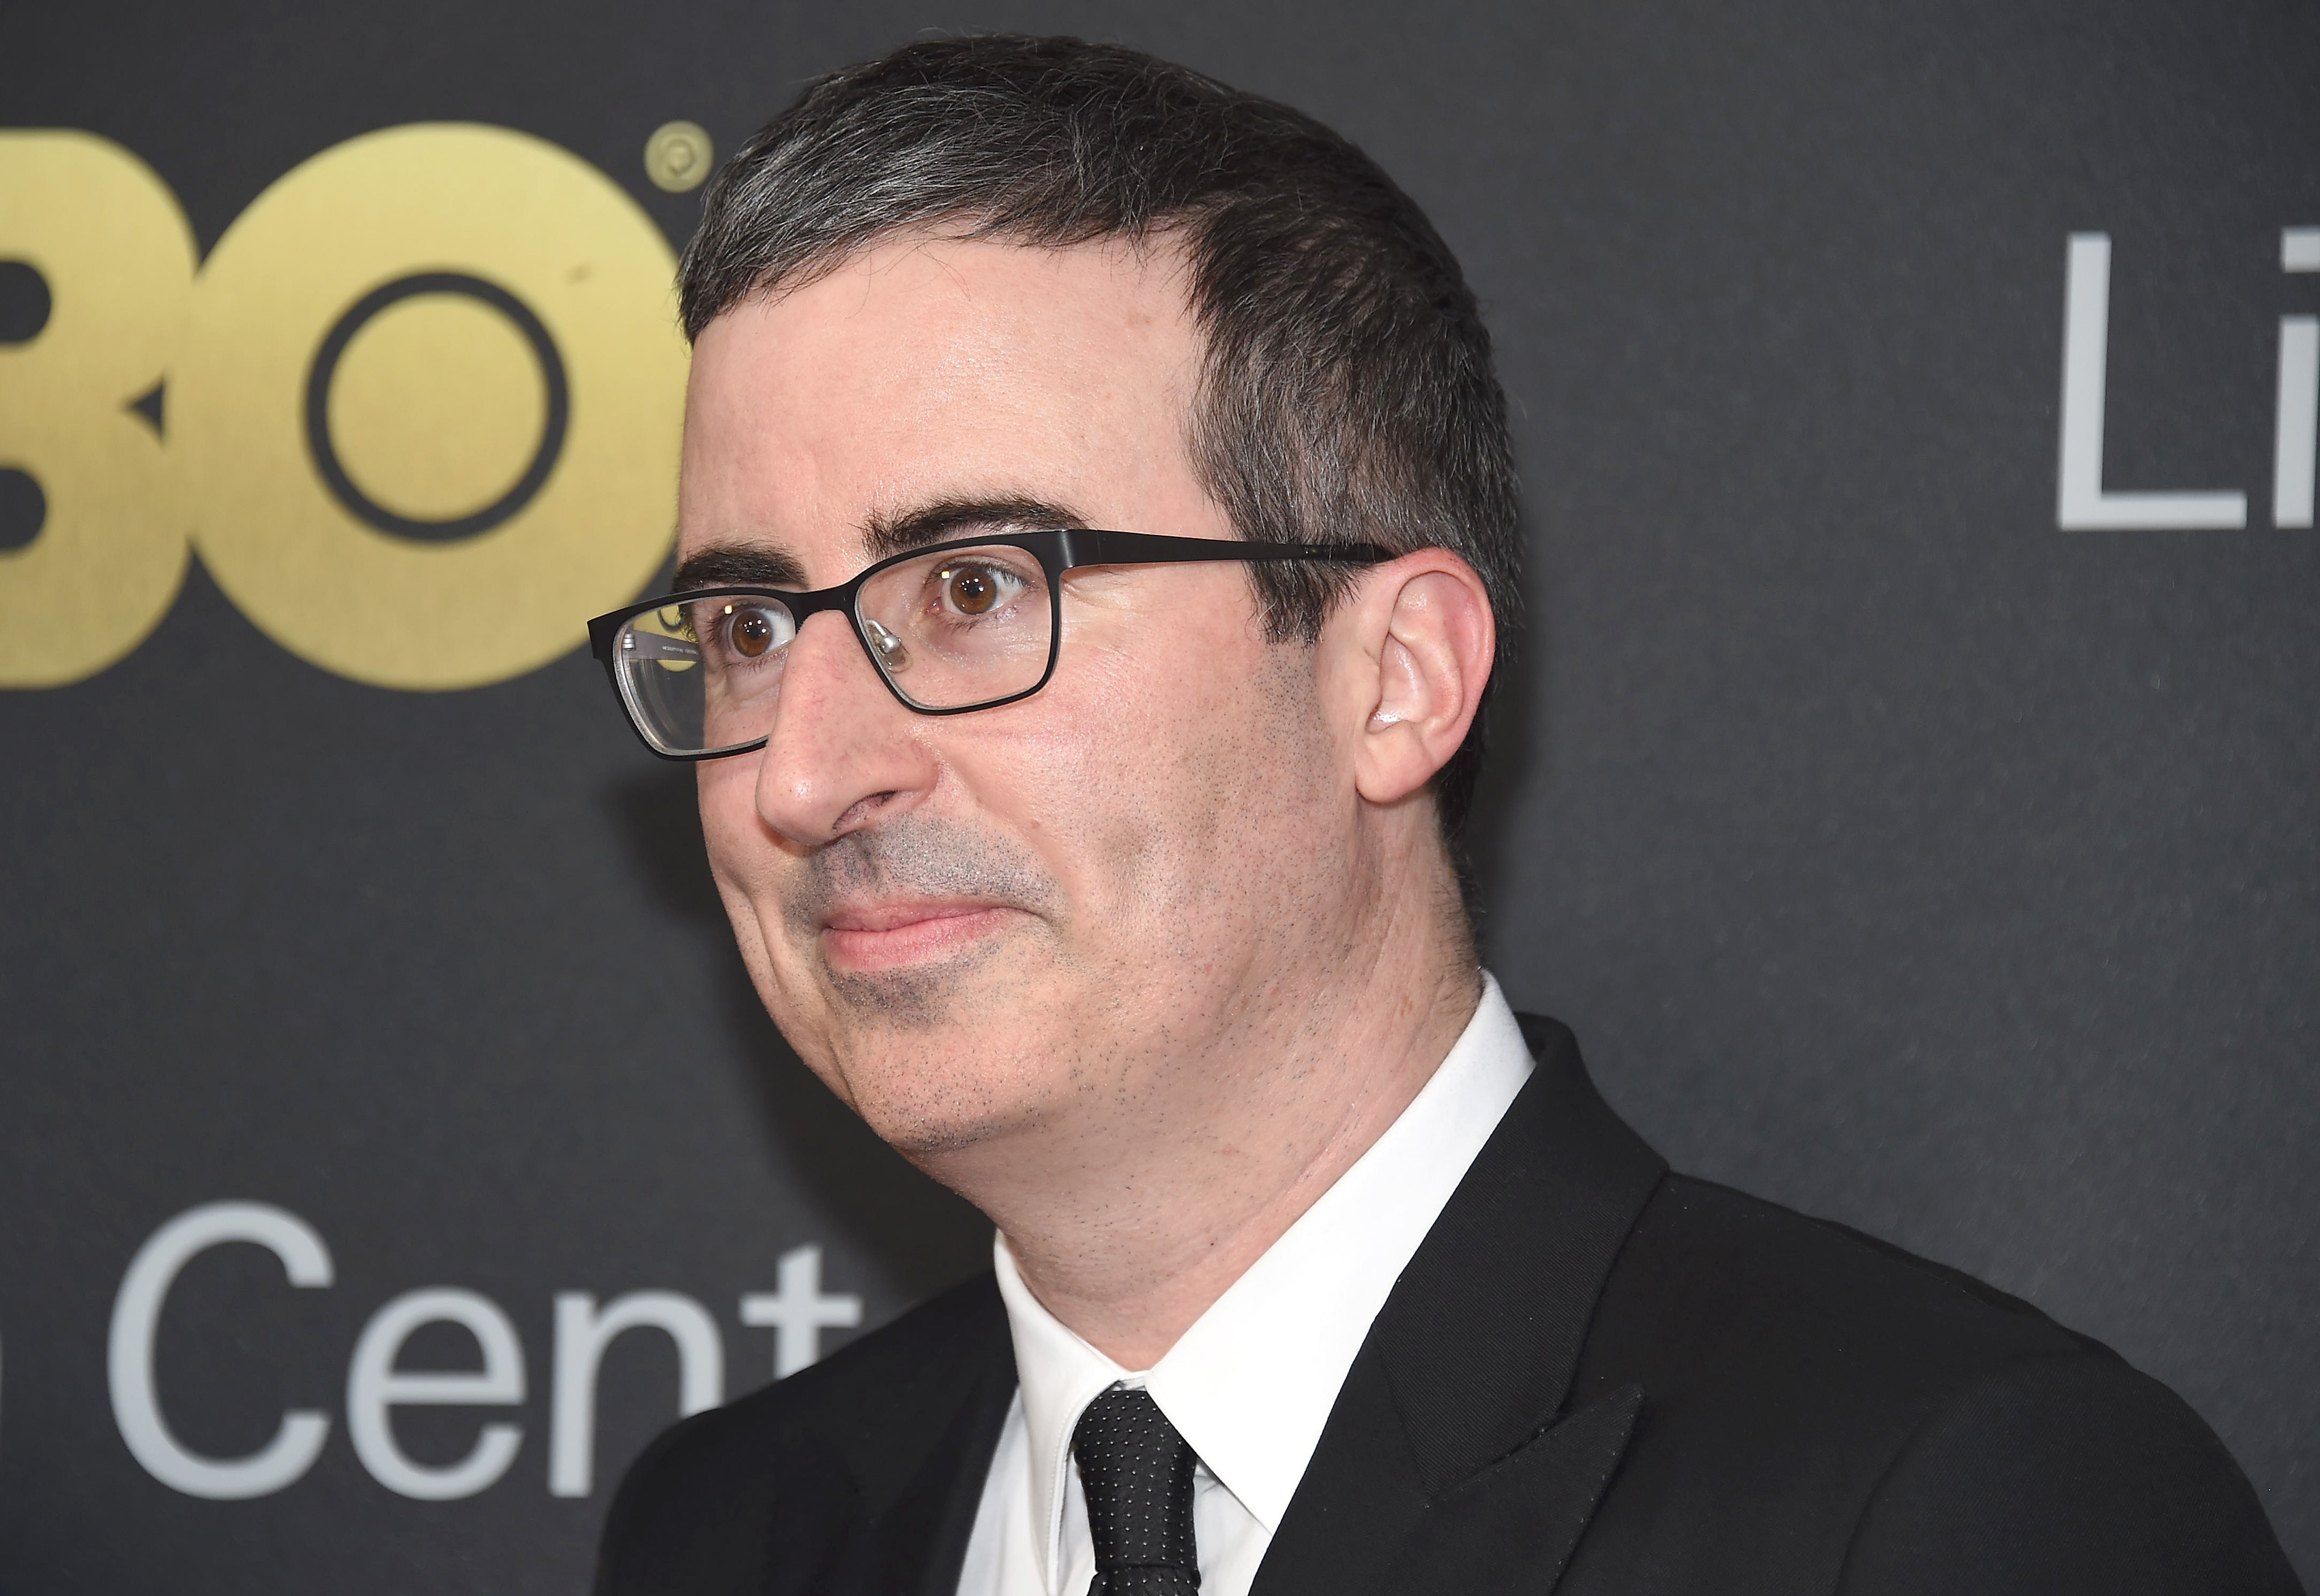 Comedian and TV host John Oliver at Alice Tully Hall, Lincoln Center on May 29, 2018 in New York City. (Gary Gershoff—WireImage/Getty Images)